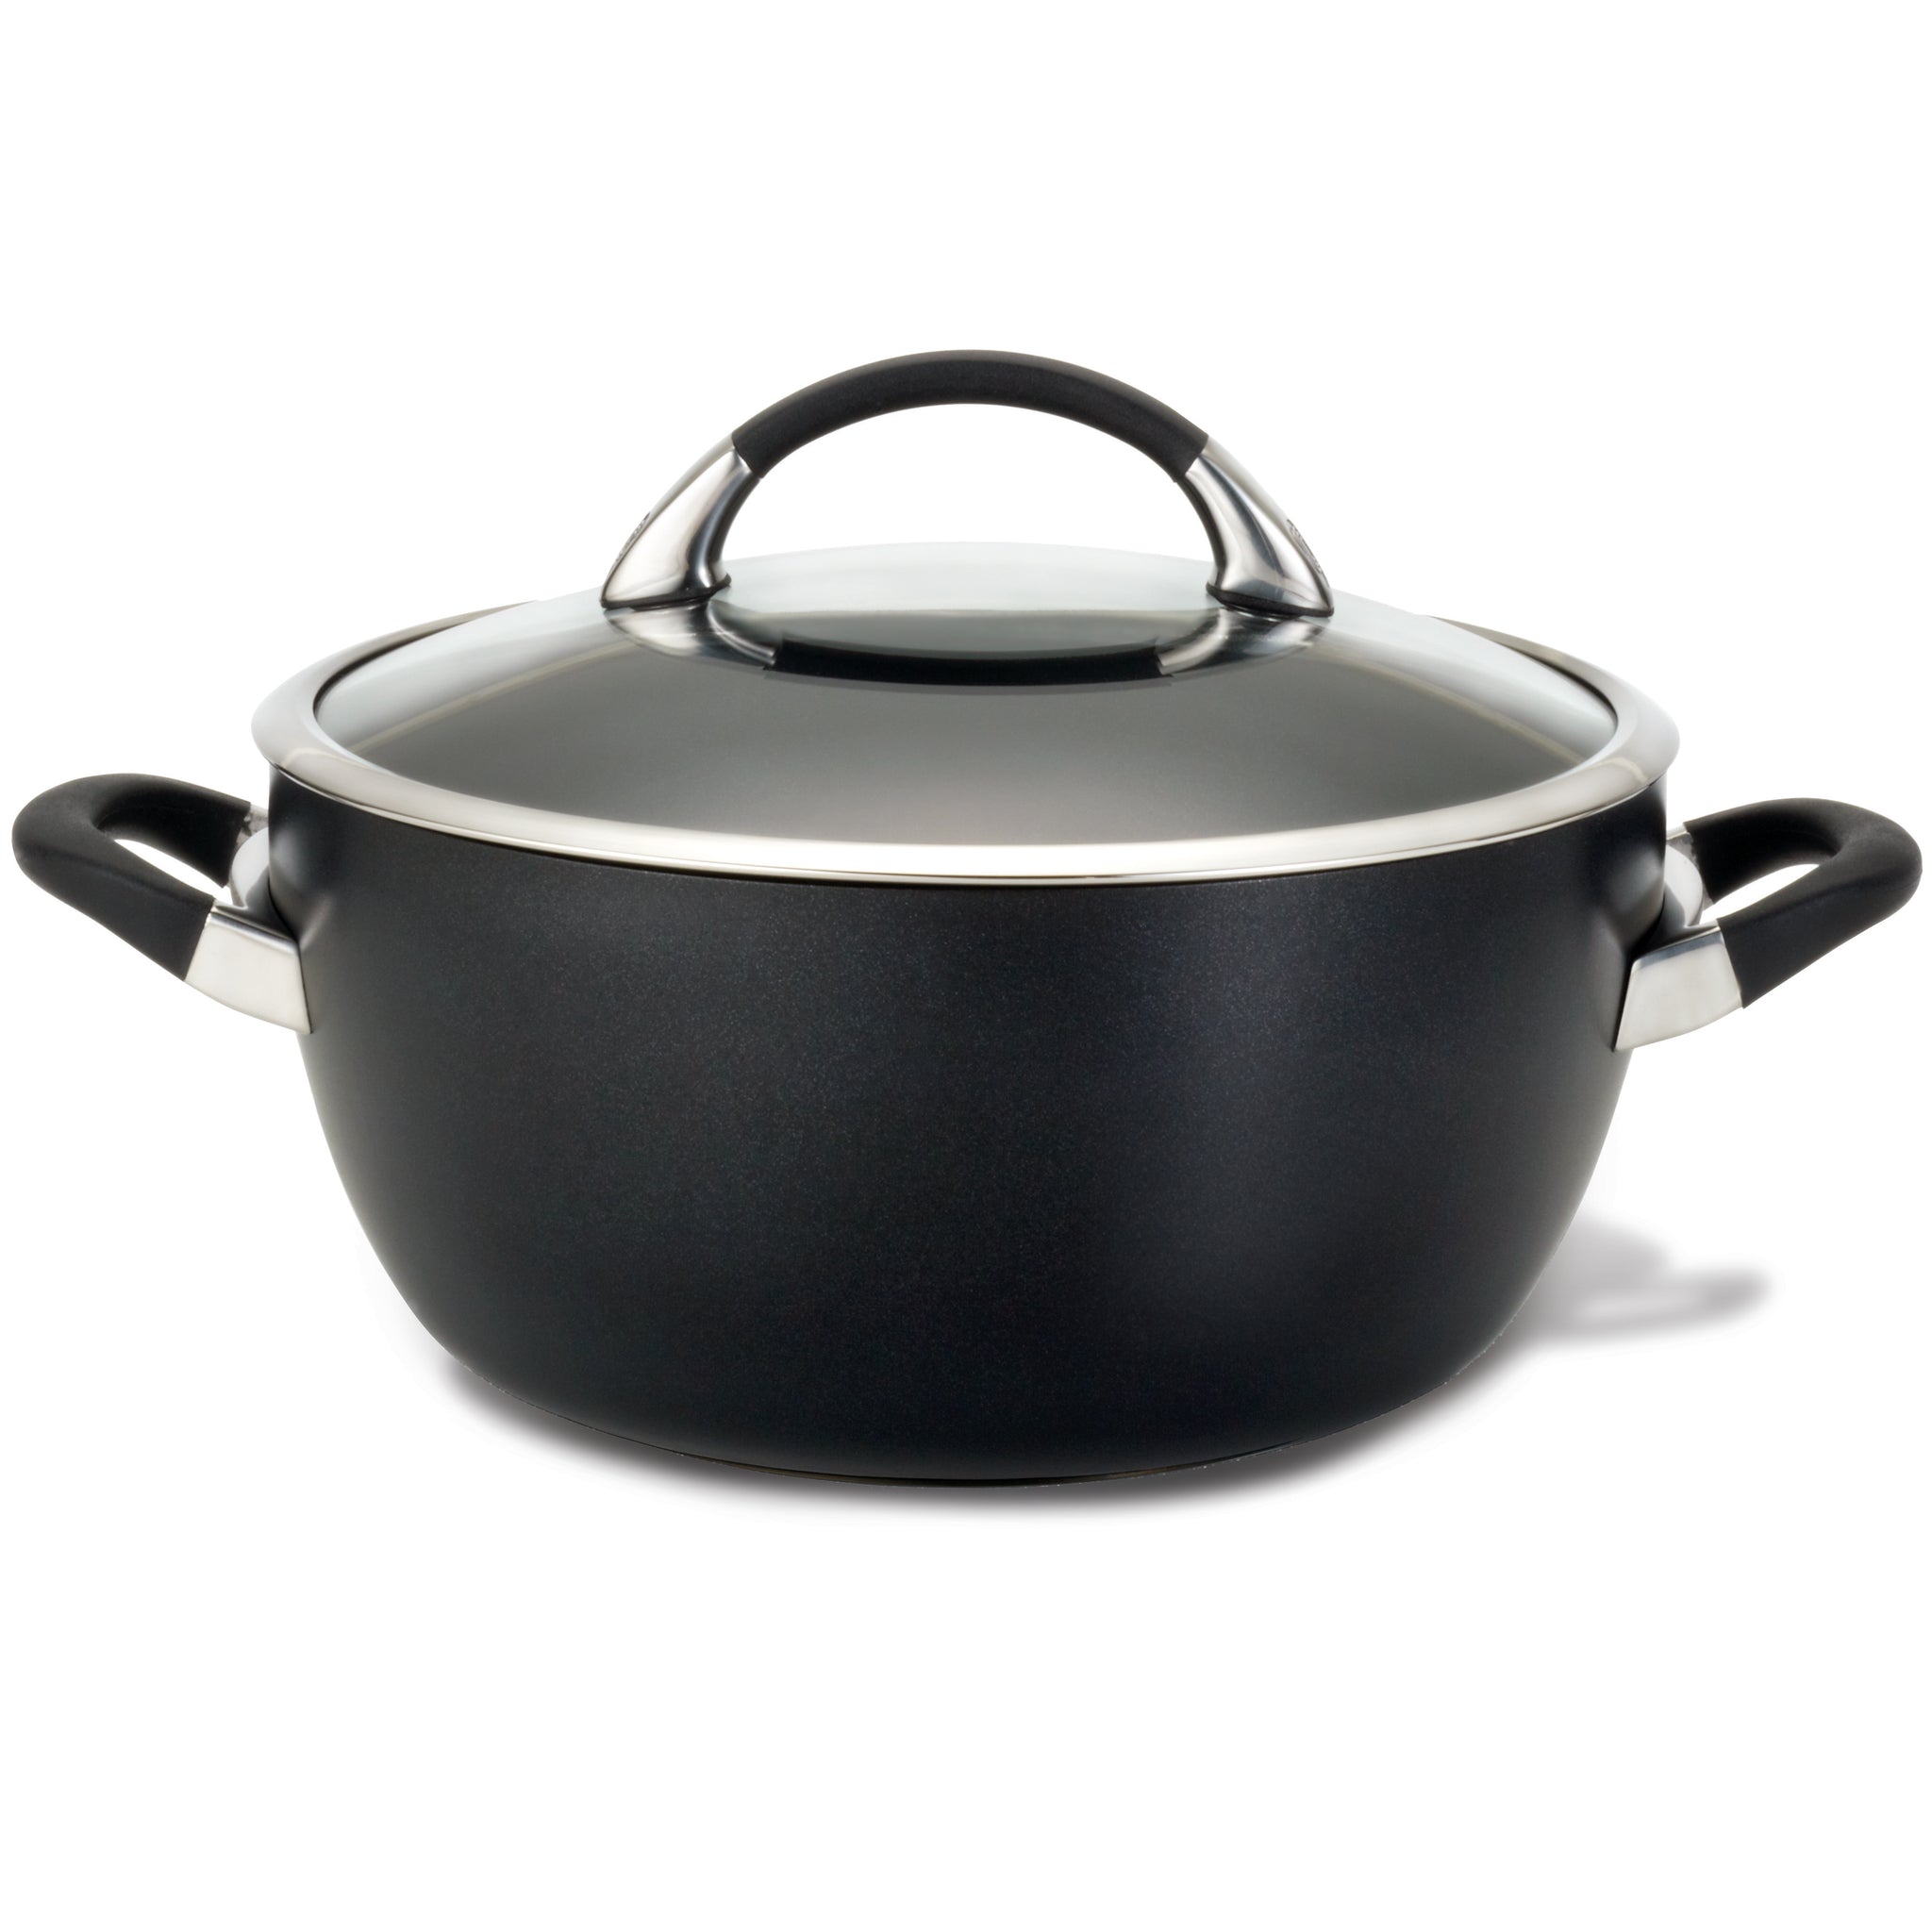 Natural Elements Low Casserole- Says oven safe to 300? : r/castiron